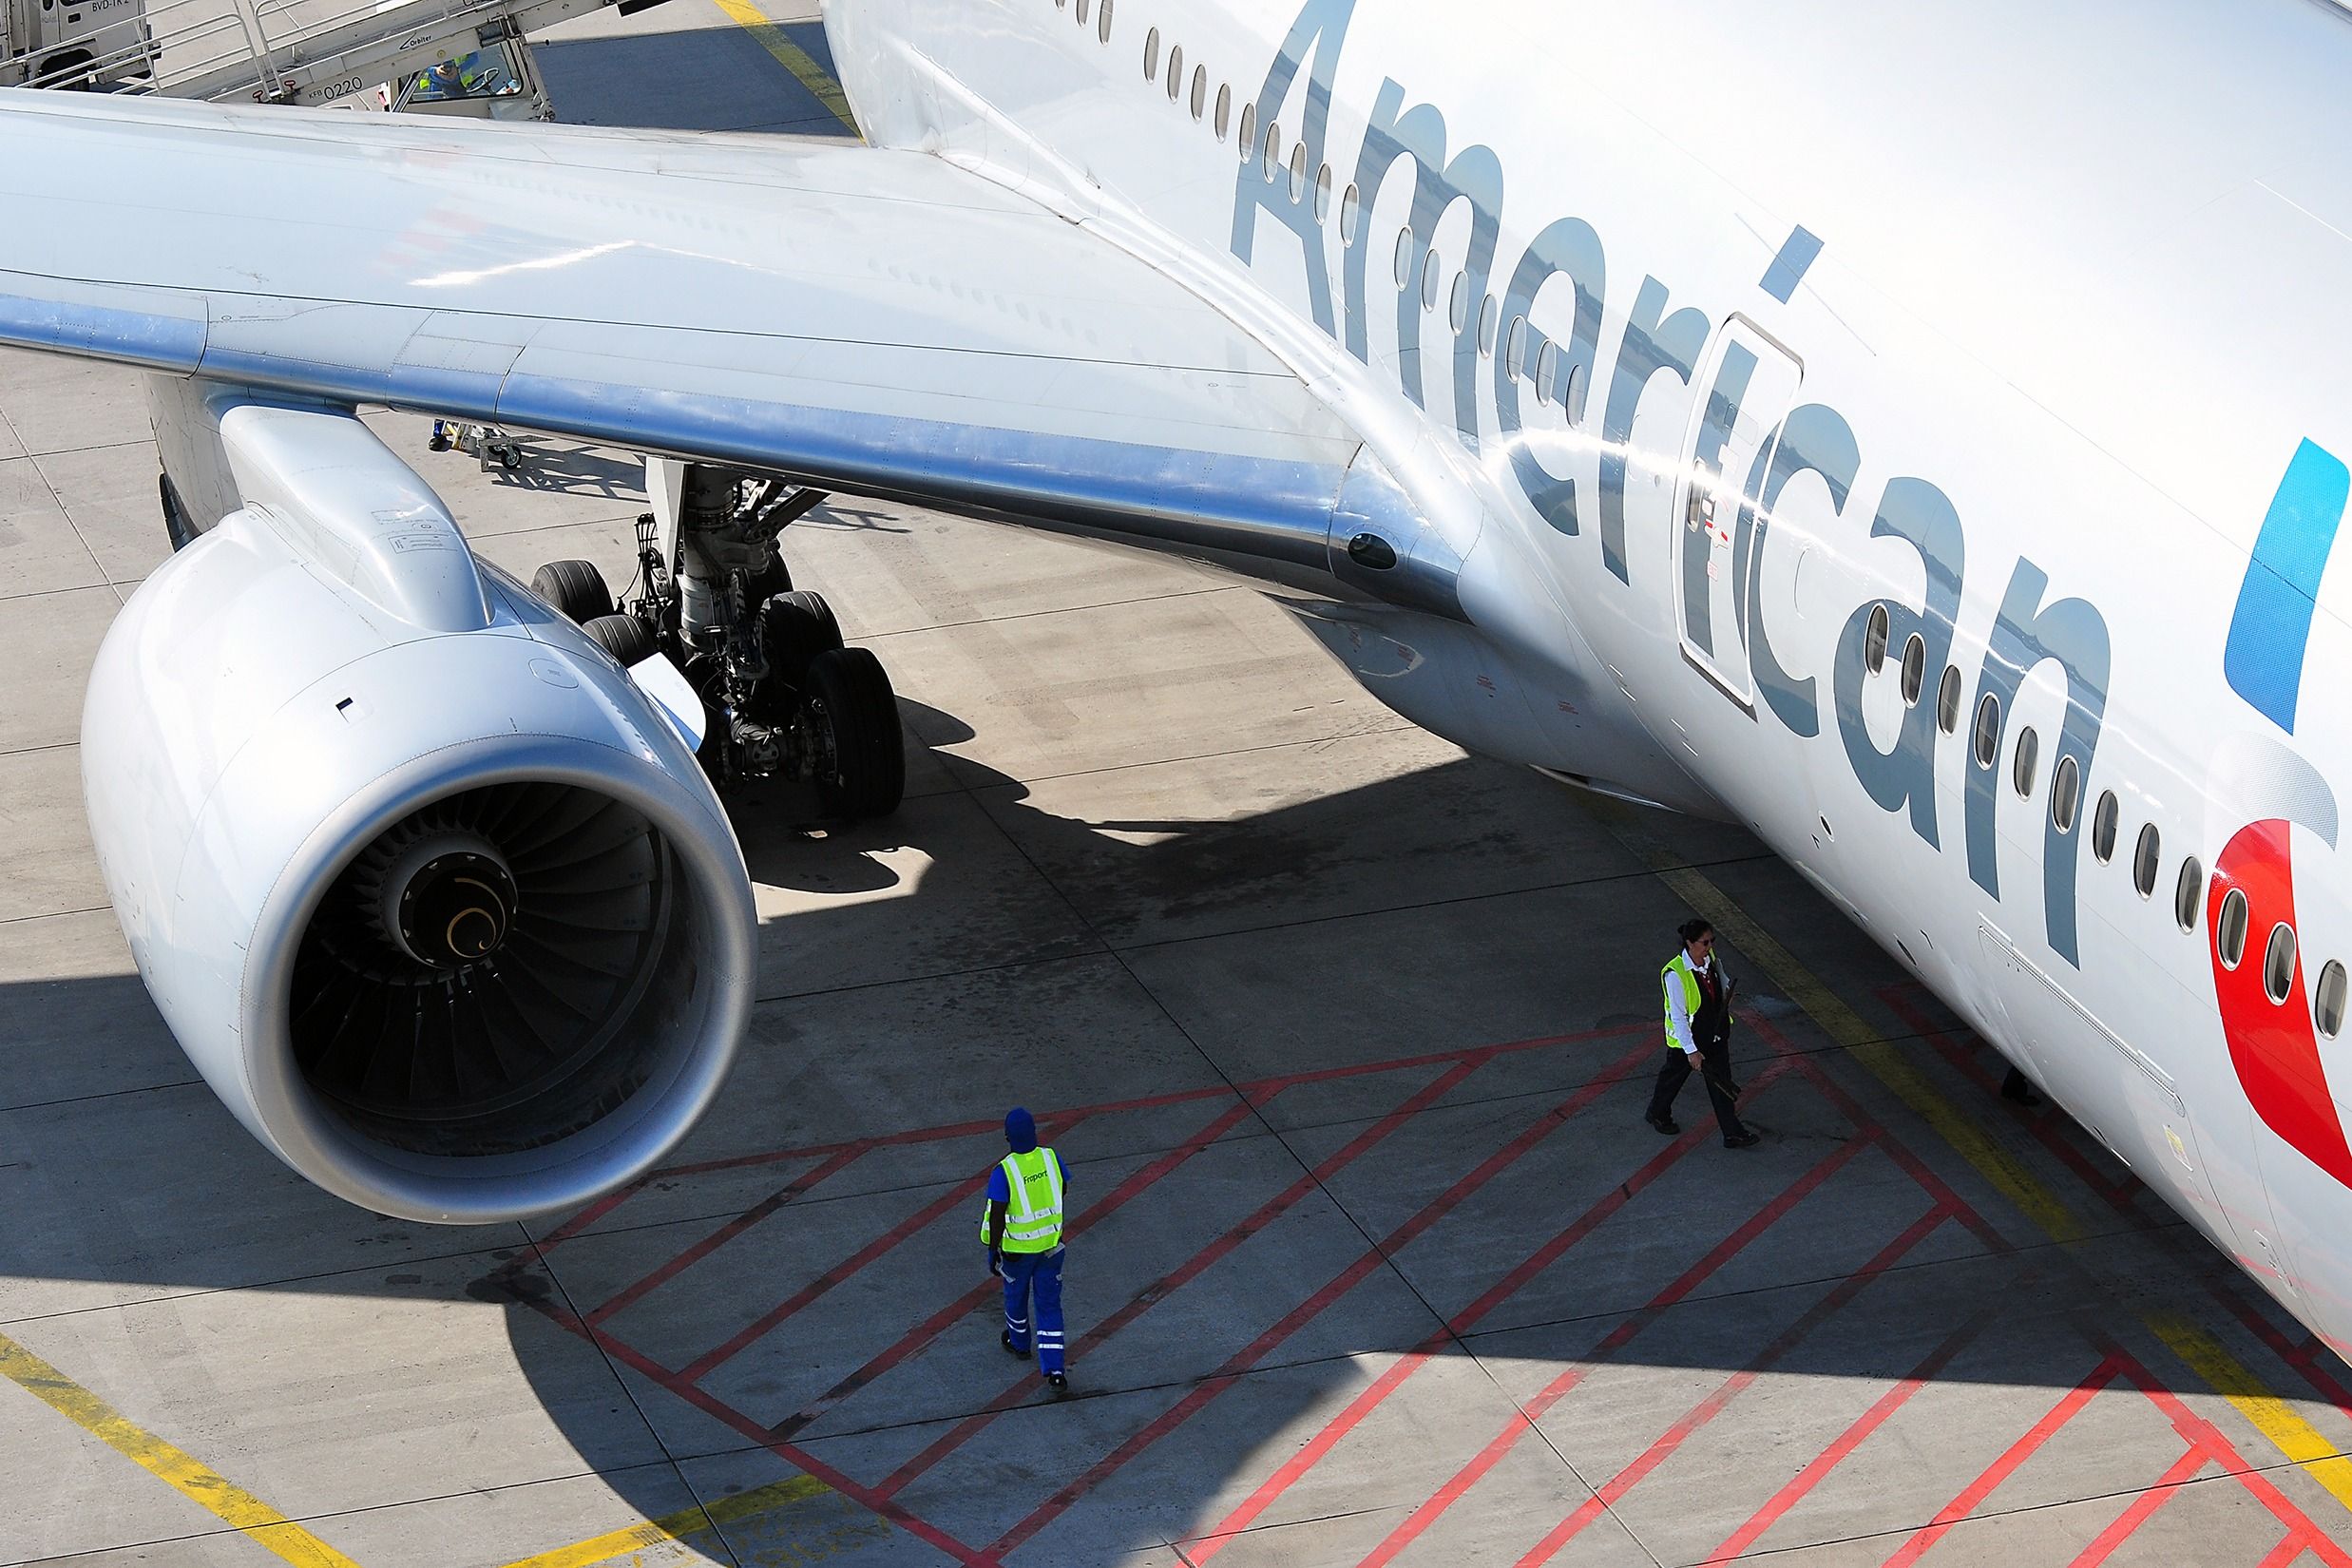 Two workers walking underneath an American Airlines aircraft parked at an airport gate.